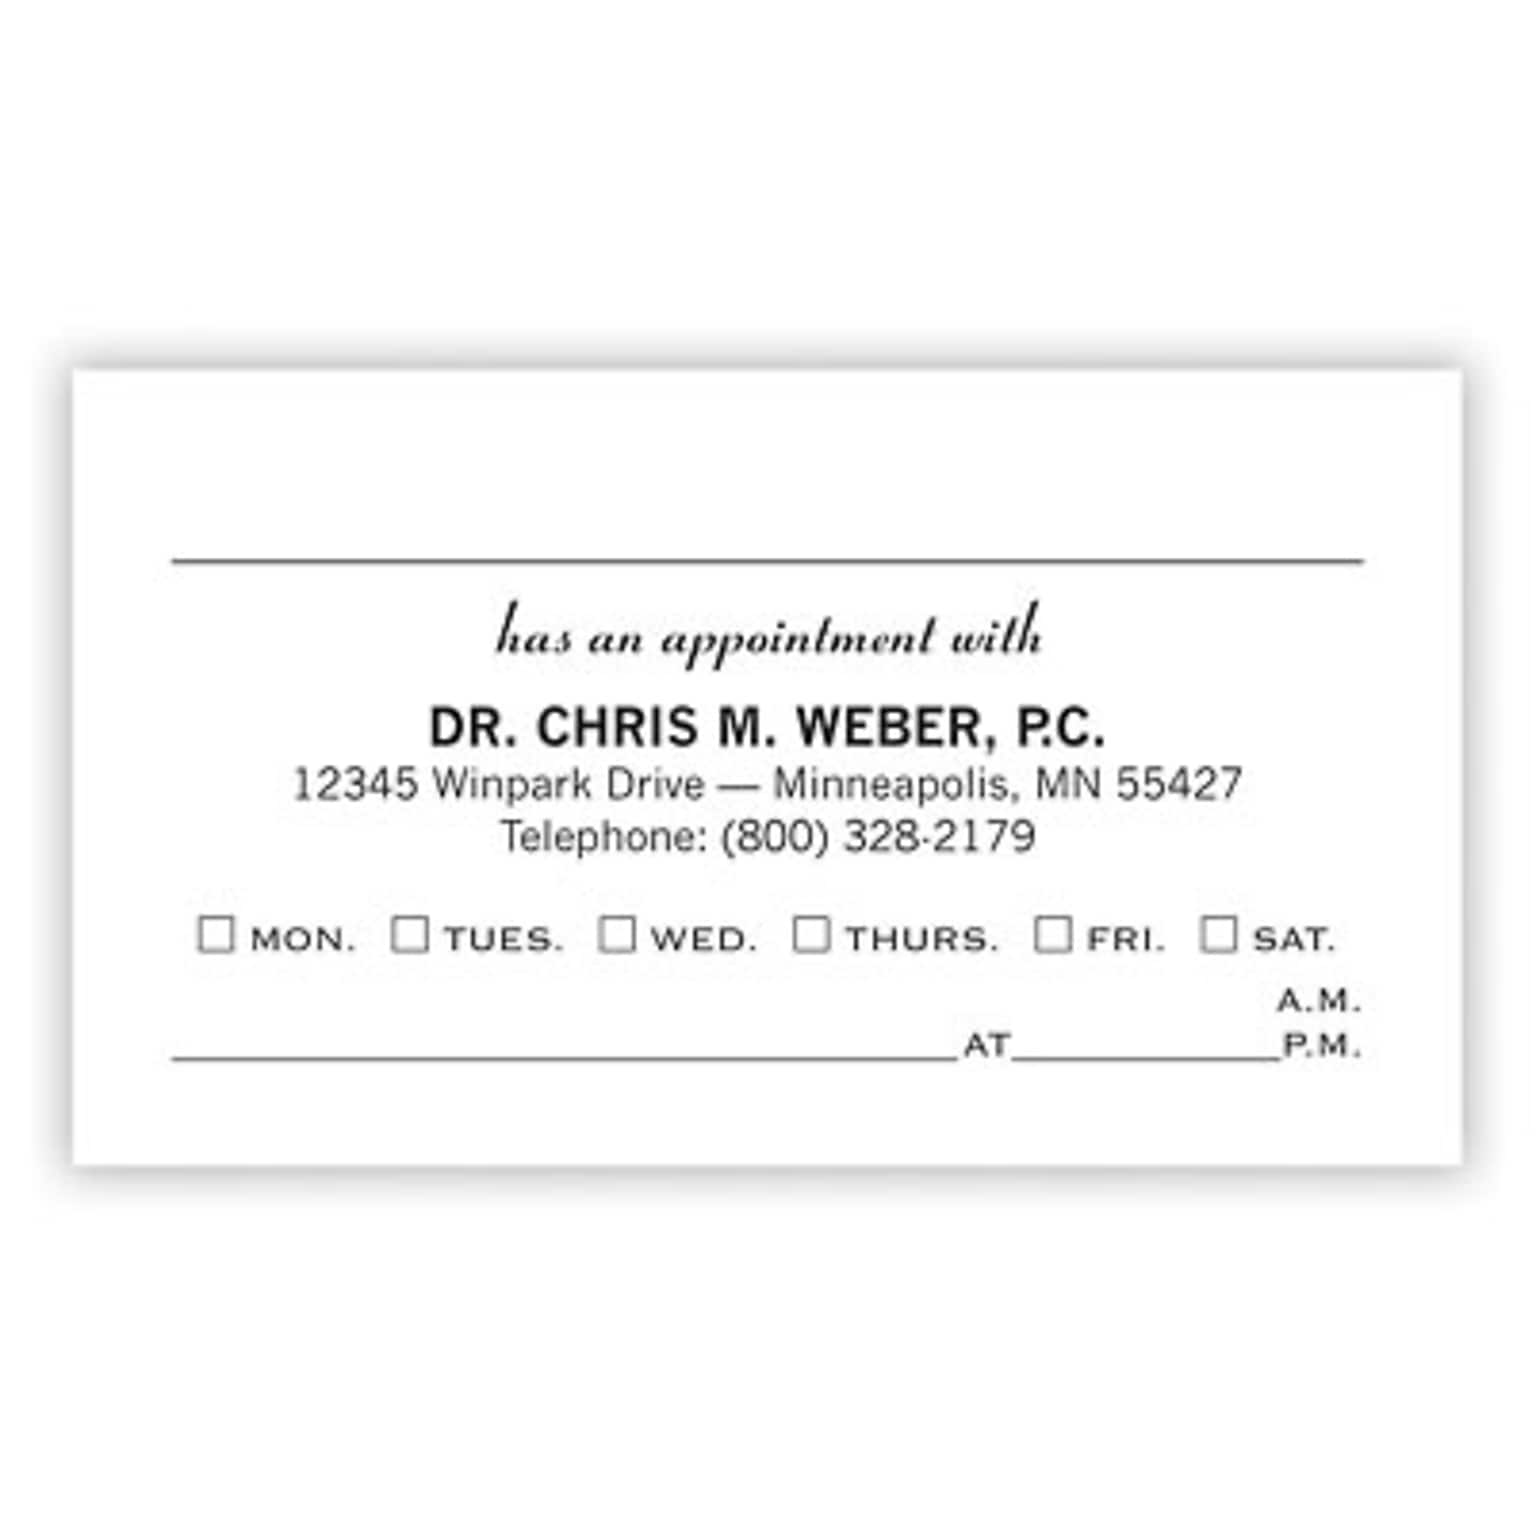 Custom 1-2 Color Appointment Cards, CLASSIC CREST® Baronial Ivory 80#, Raised Print, 1 Custom Ink, 1-Sided, 250/Pk